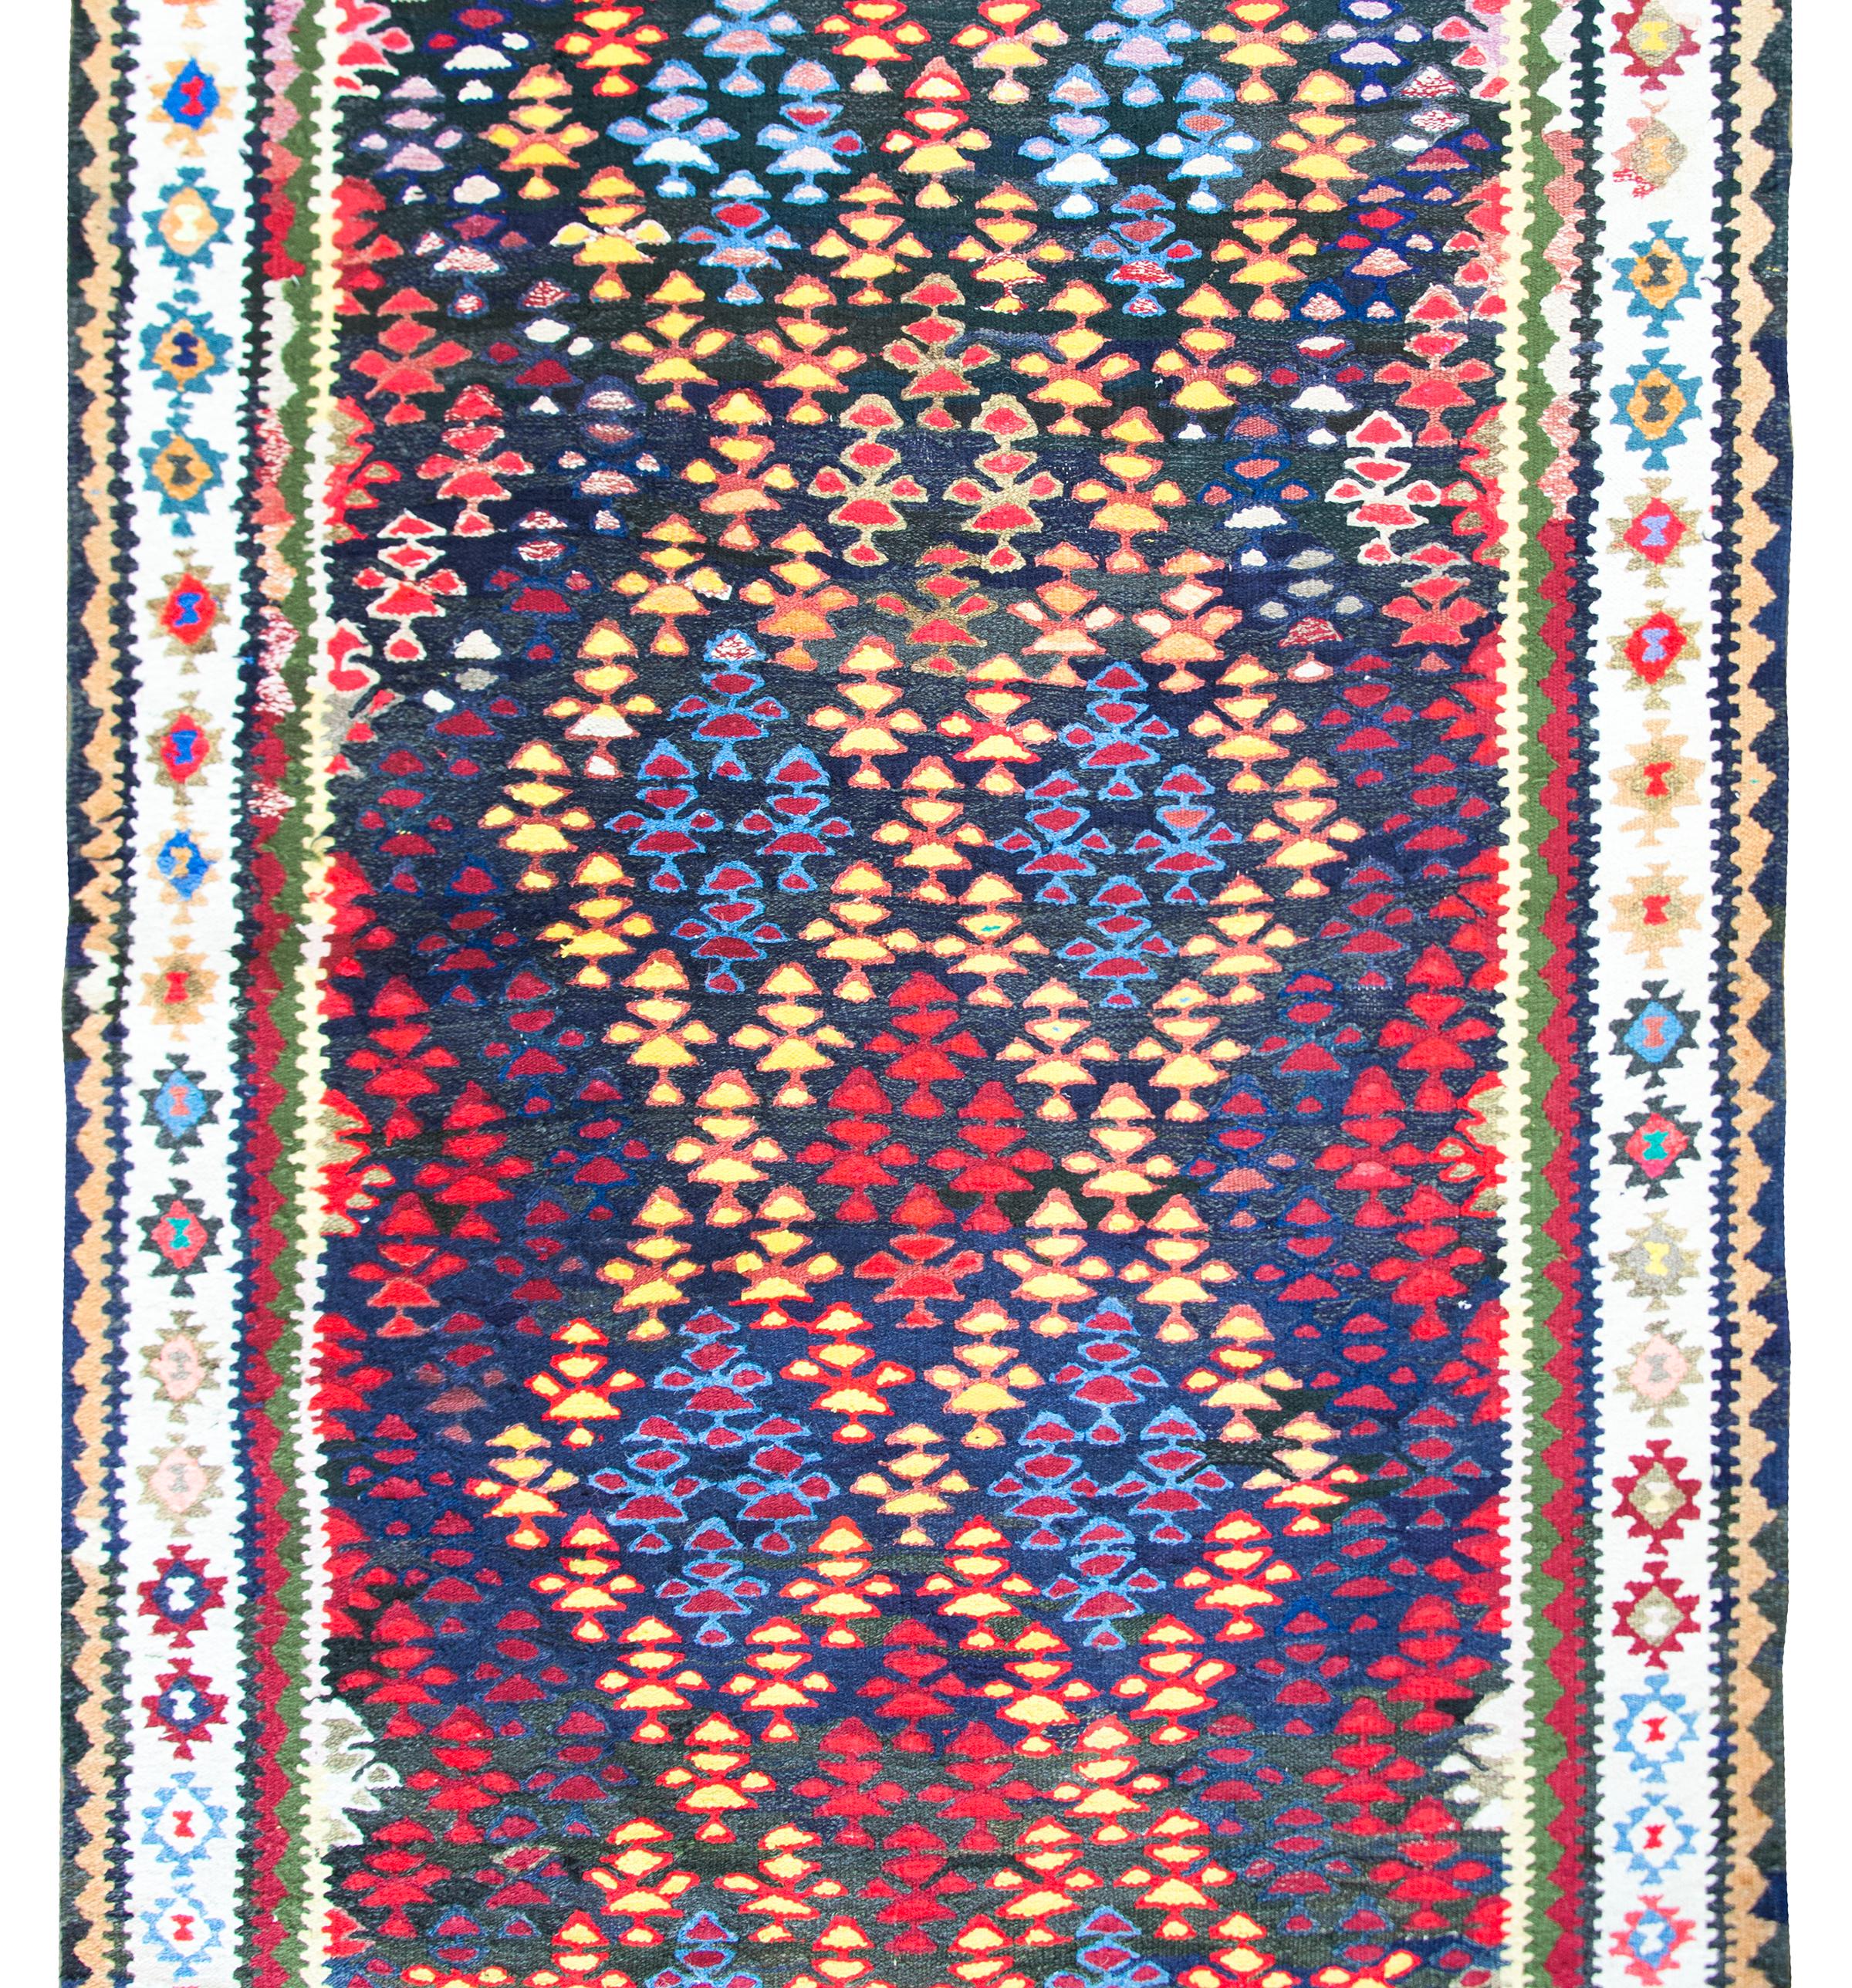 A wonderful vintage Persian Qazvin kilim rug with all-over multicolored trees-of-life woven in a pattern of criss-crossing stripes creating diamonds and a trellis pattern, surrounded by a complex border of more stylized flowers and geometric